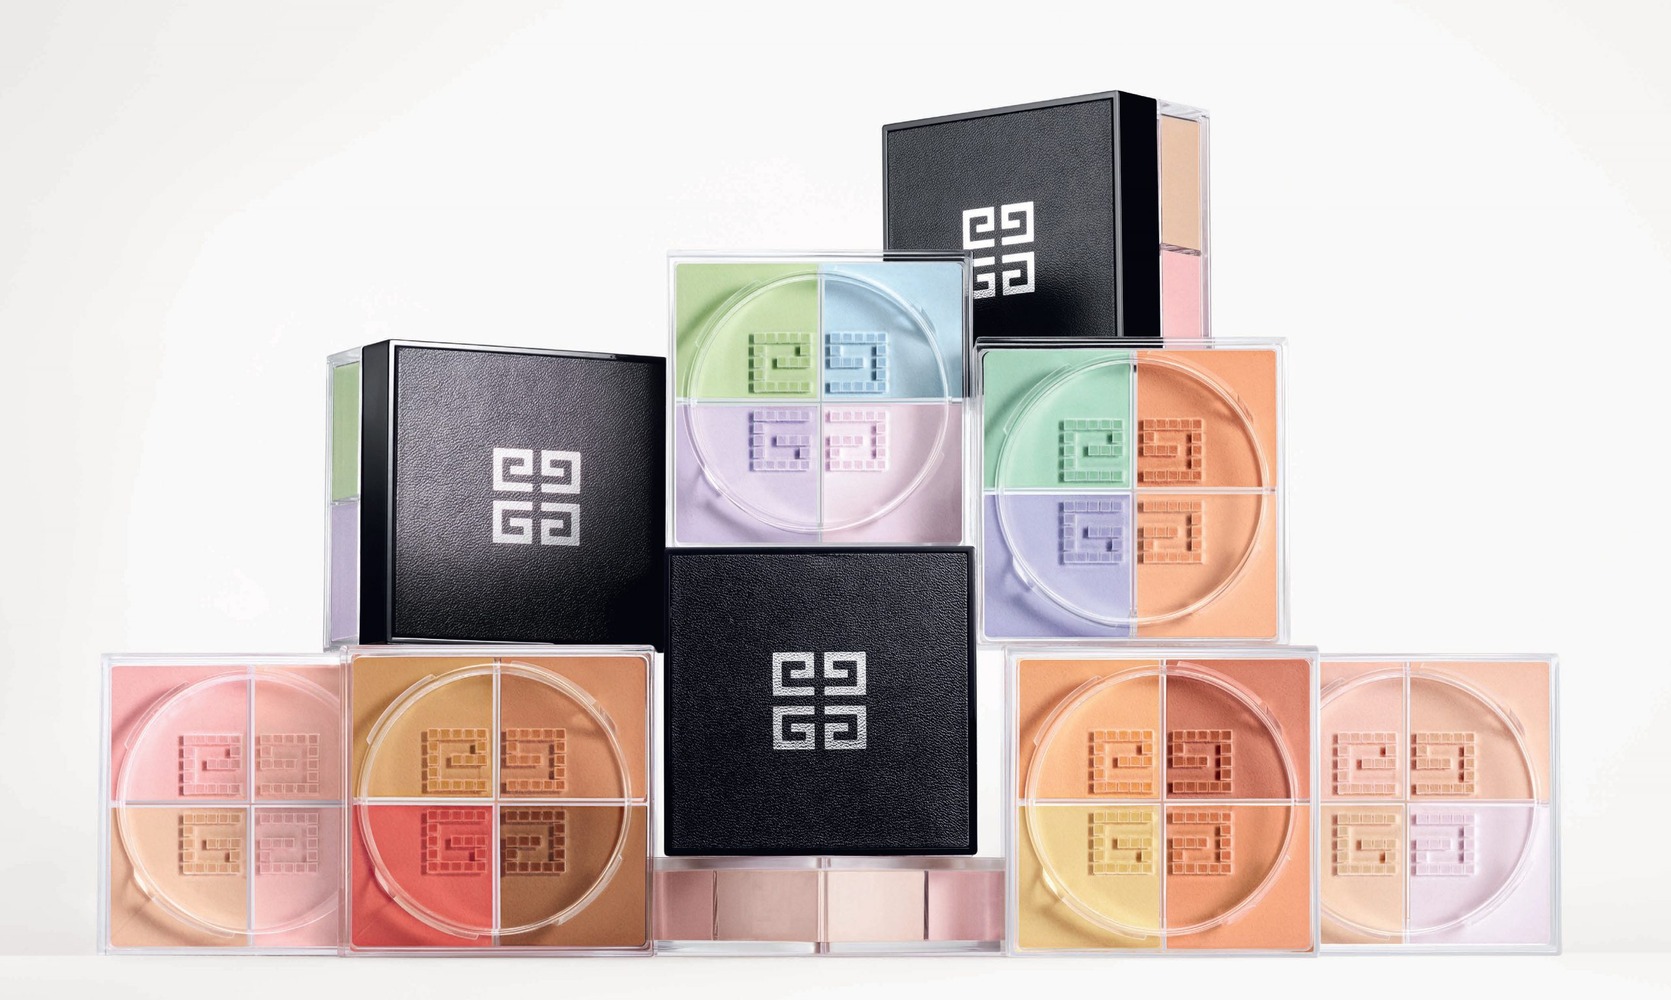 Givenchy Beauty Prisme Libre 2020 Collection in an Extended Color Range |  LES FAÇONS